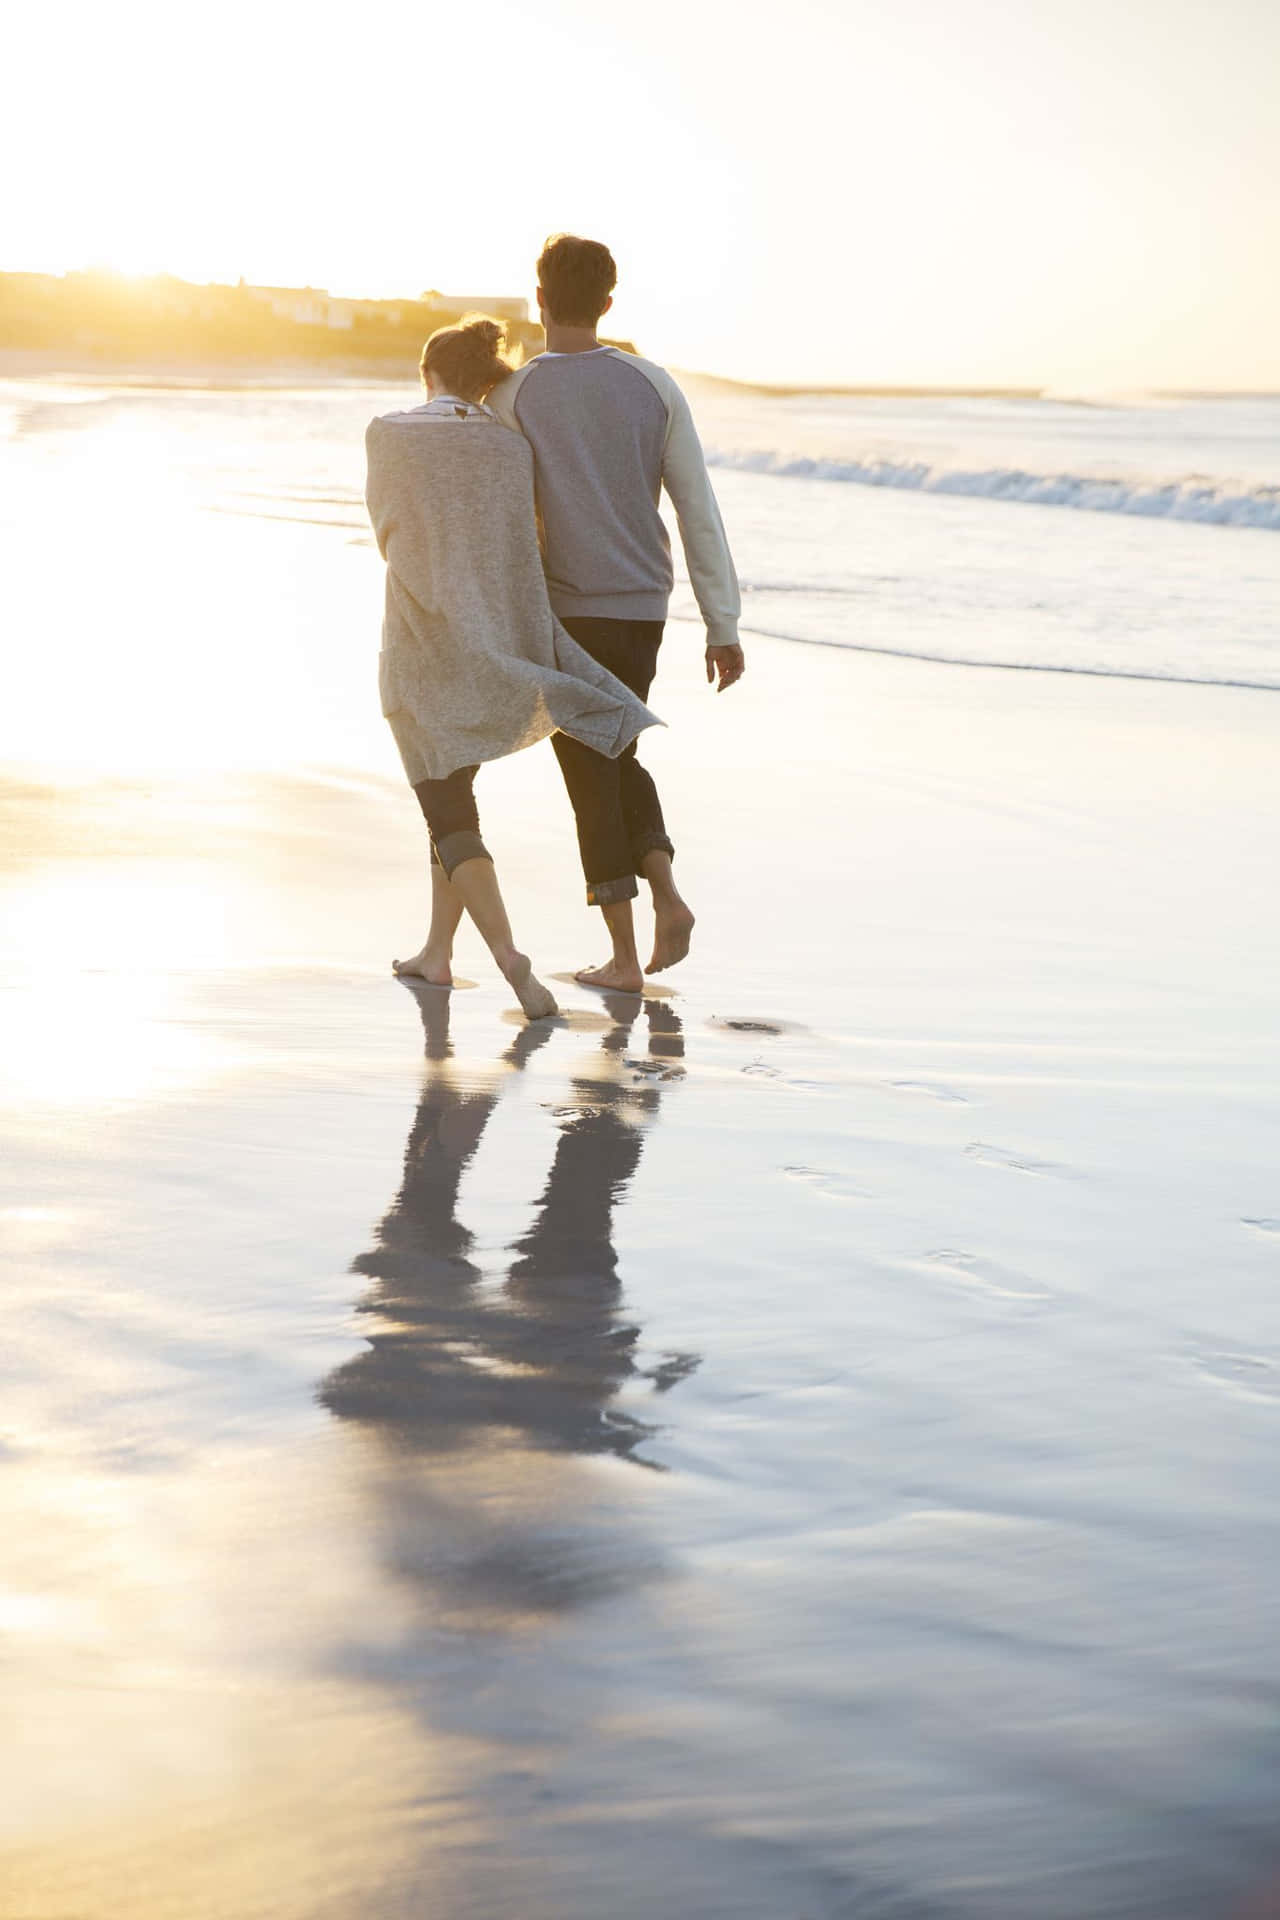 Couple At Beach Walking On Wet Sand During Sunset Picture